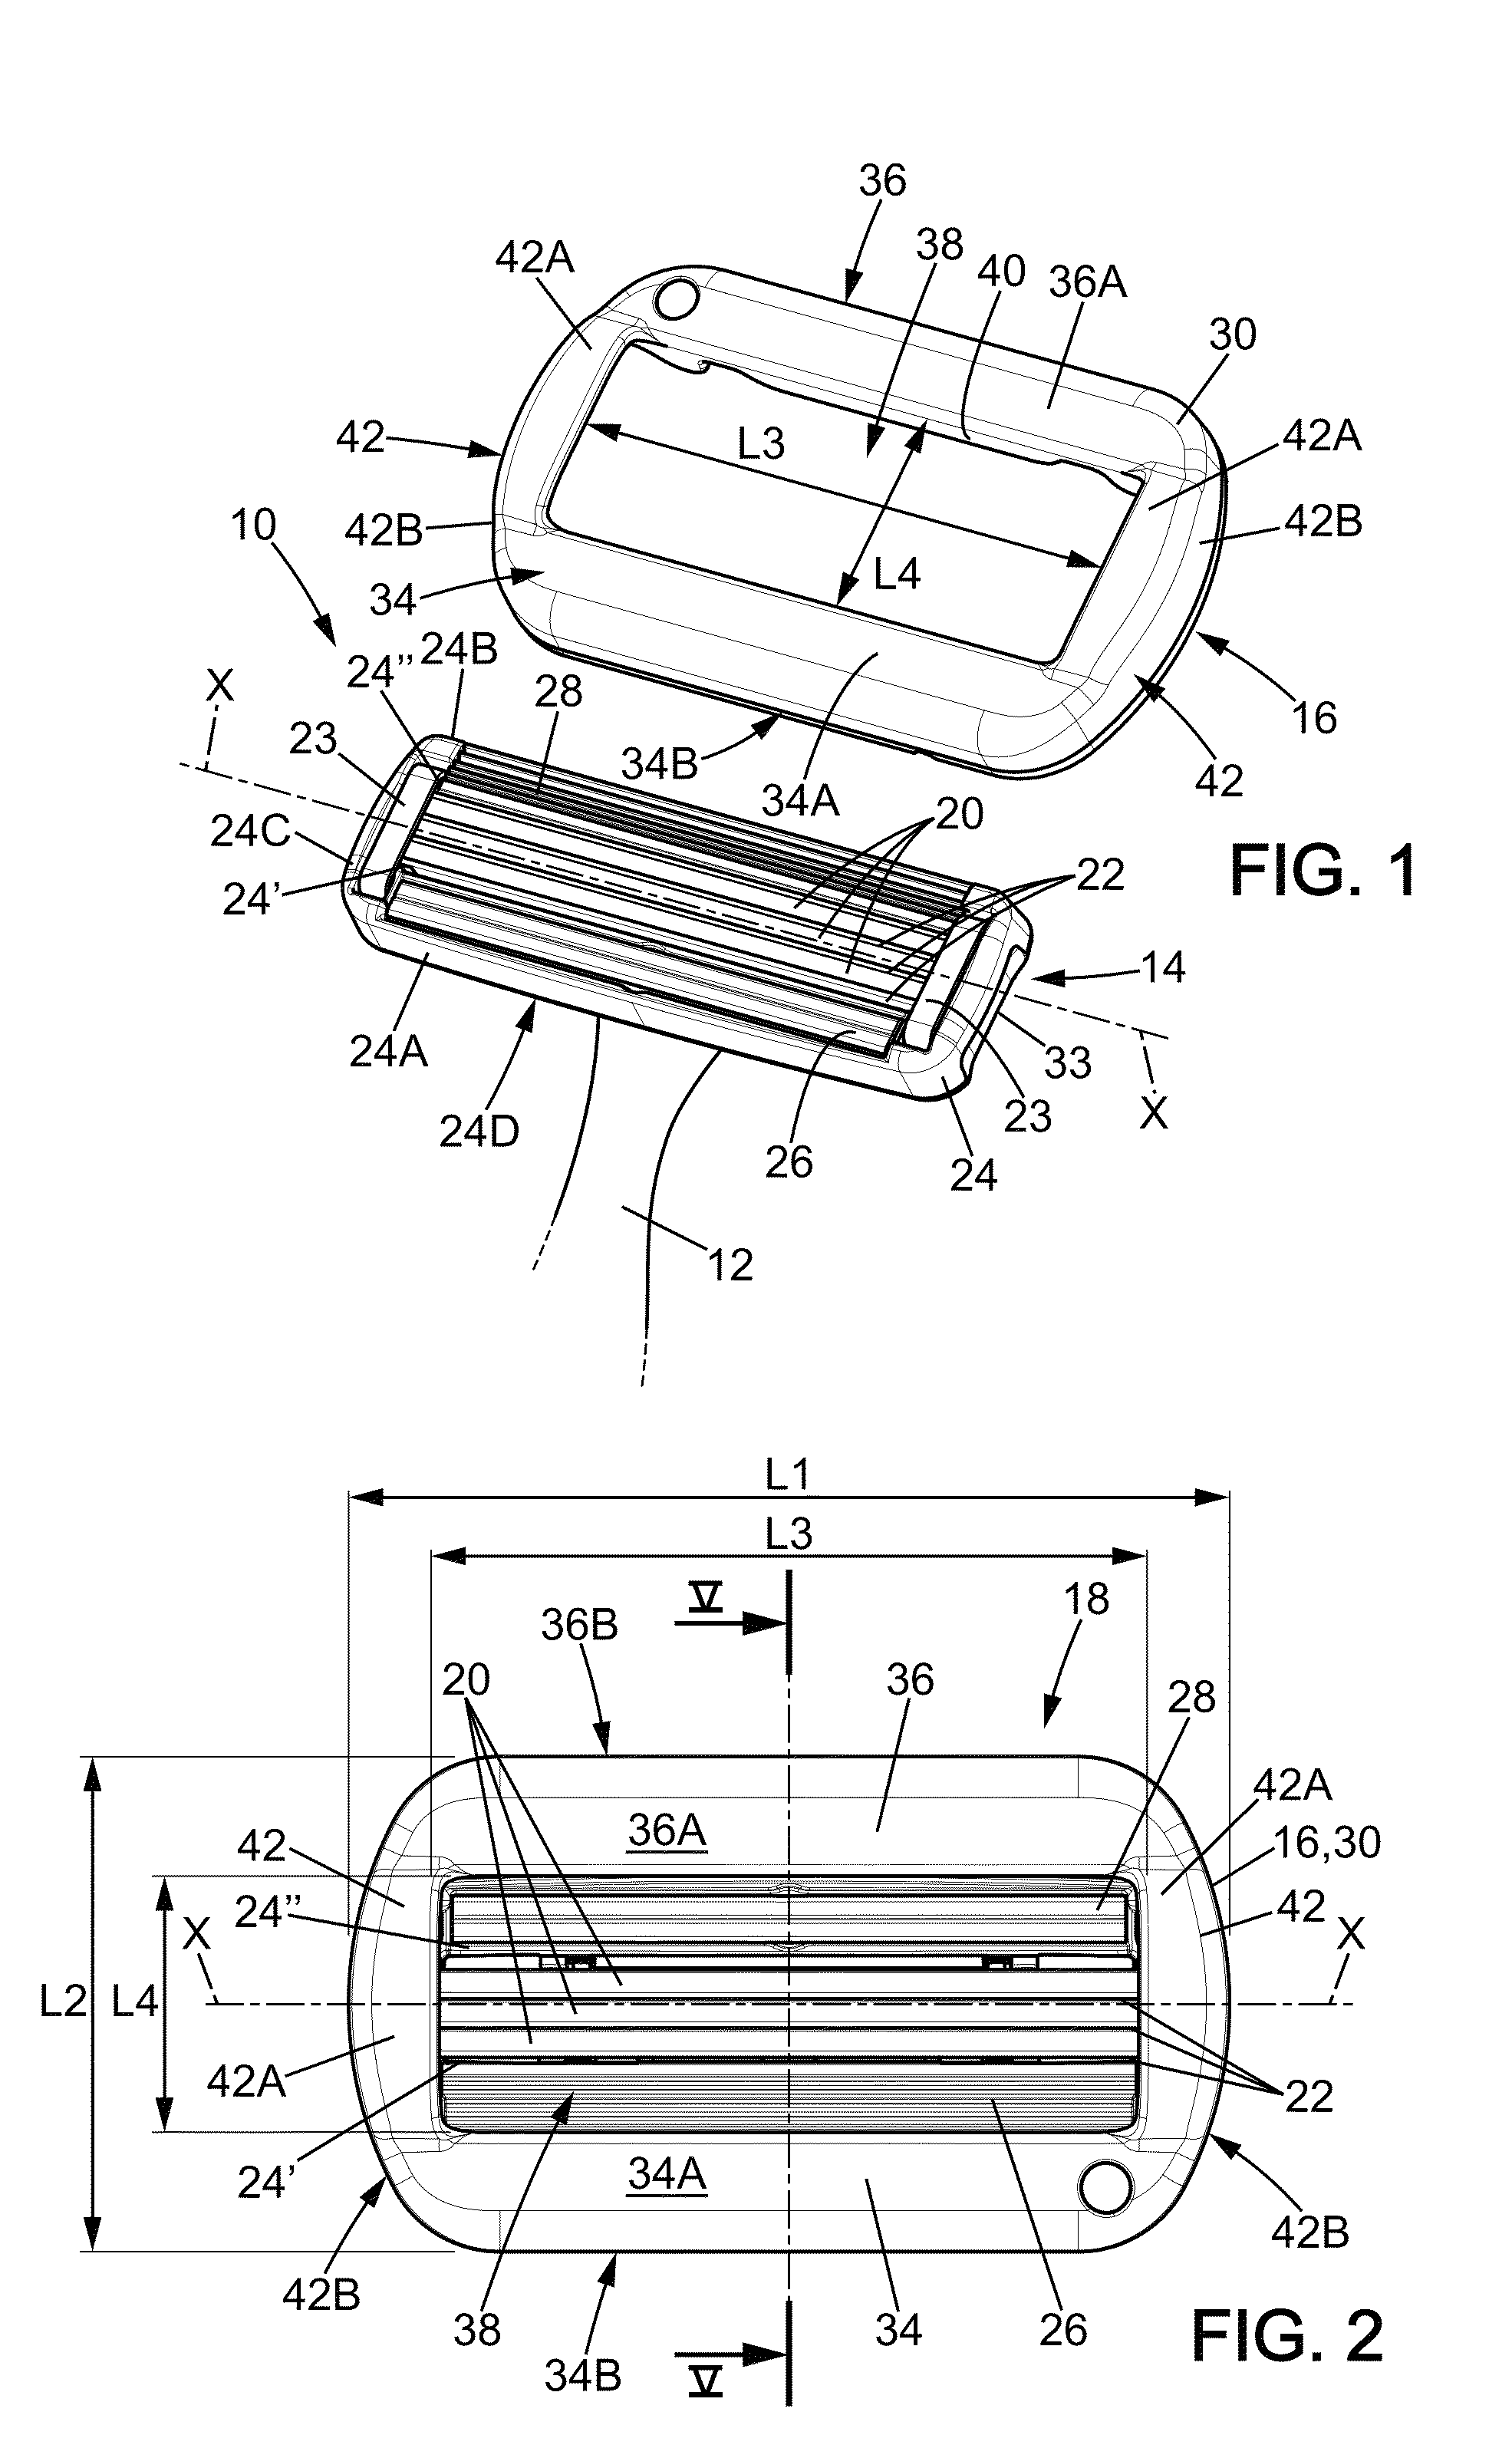 Shaving blade assembly with a blade unit and a skin contact member